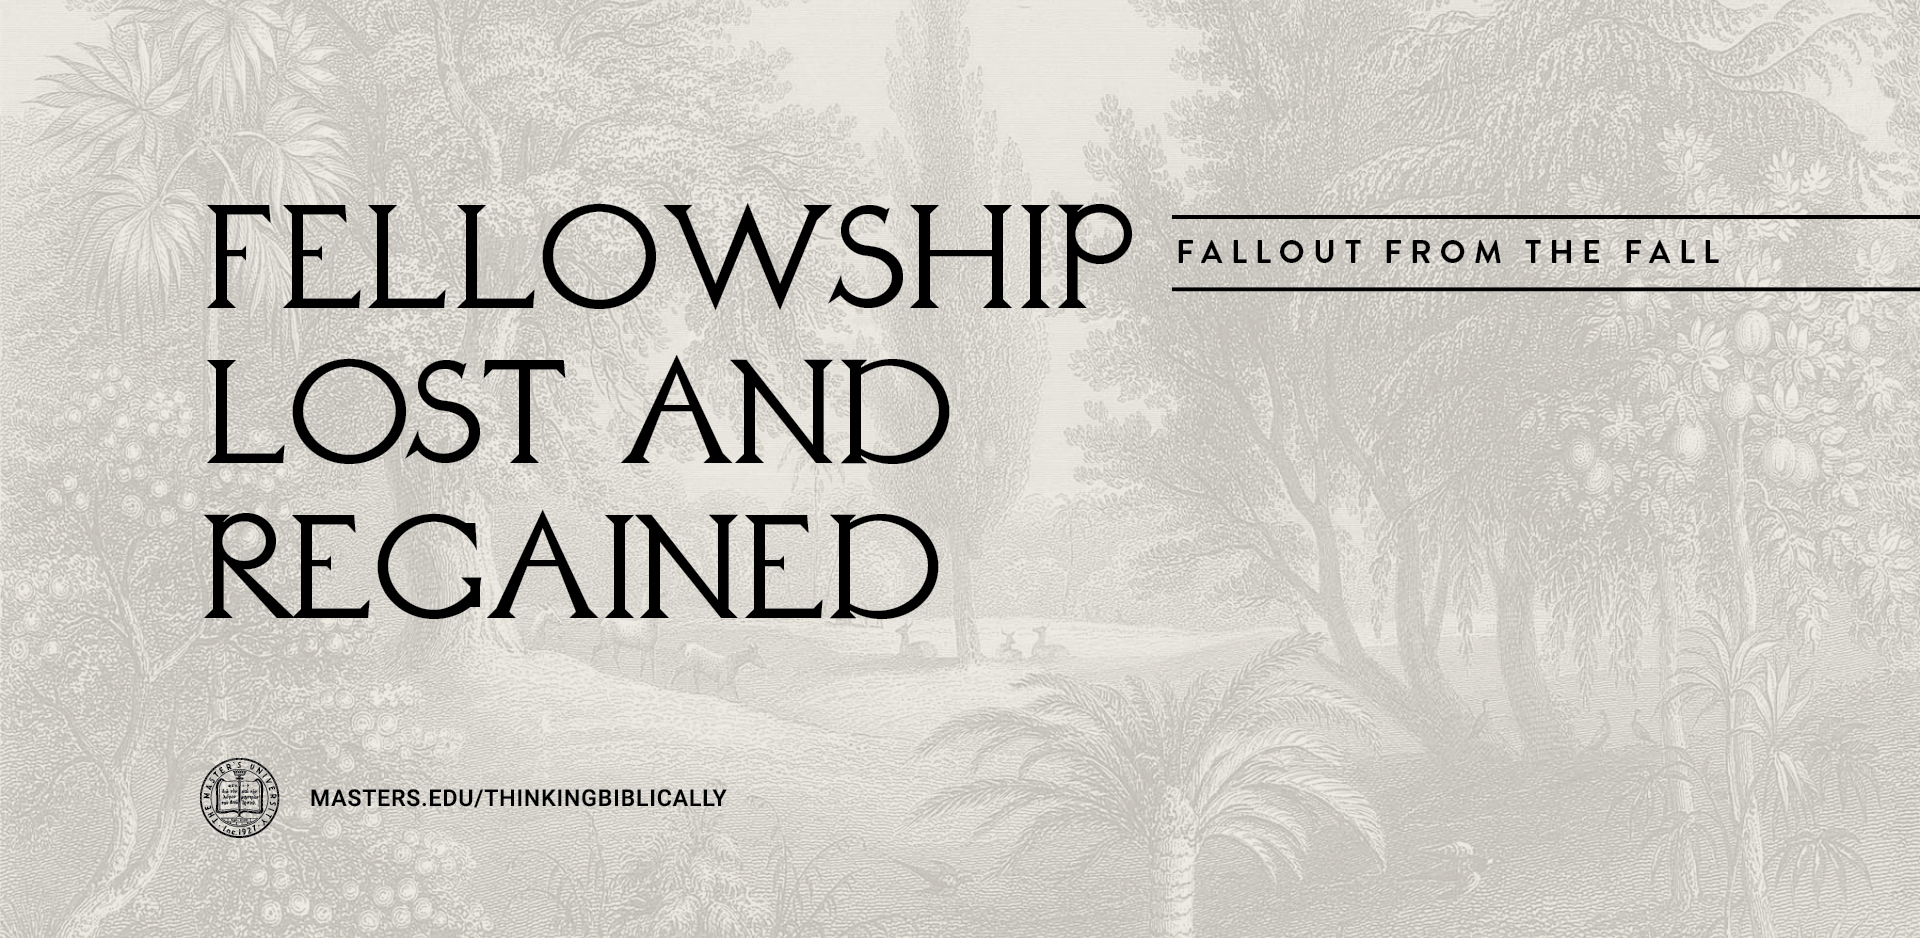 Fellowship Lost and Regained Featured Image